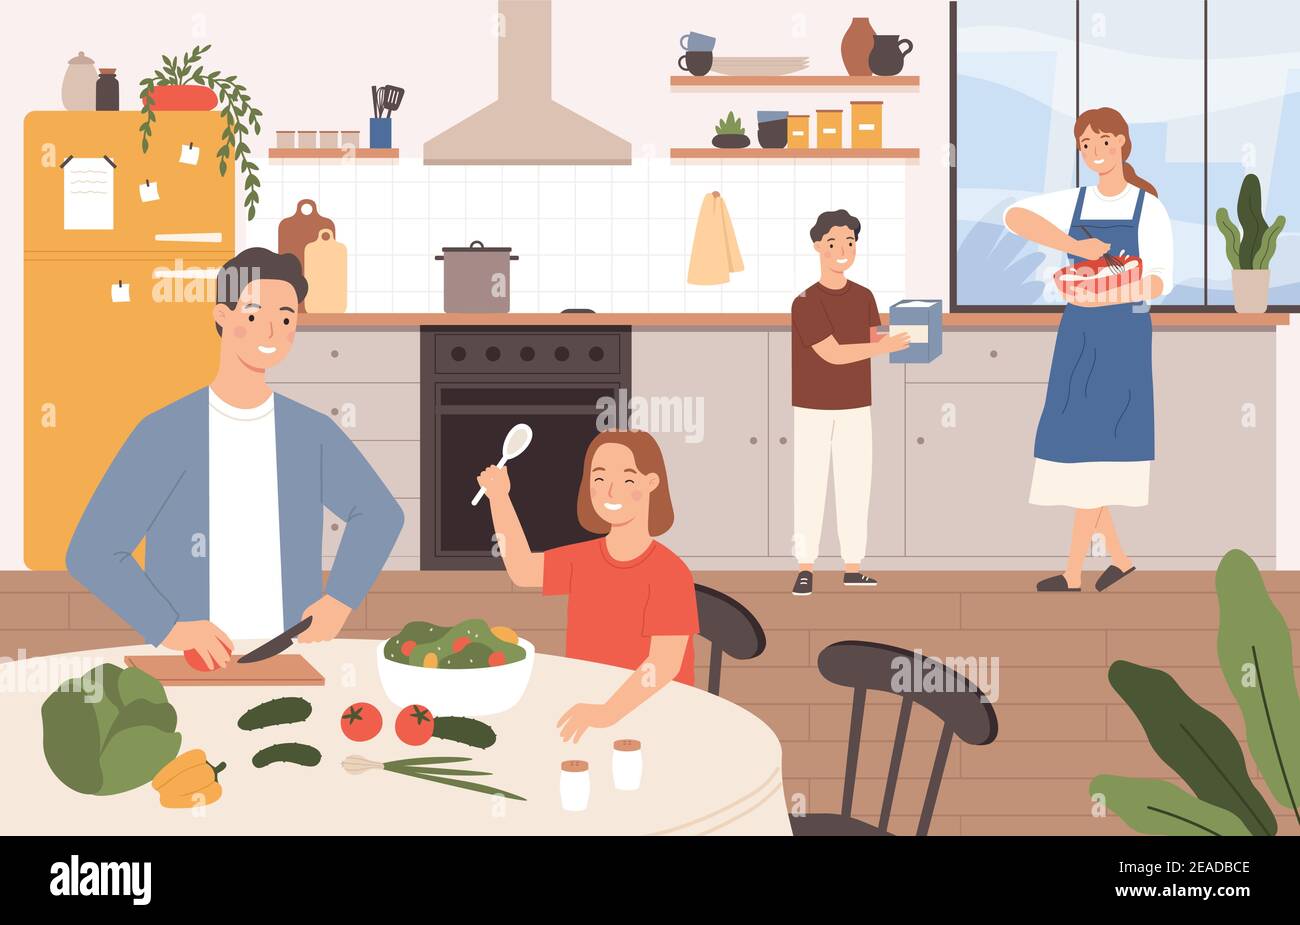 Family cooking together. Happy parents and children baking in kitchen. Son helps mother cook. Family with kids preparing food vector concept Stock Vector